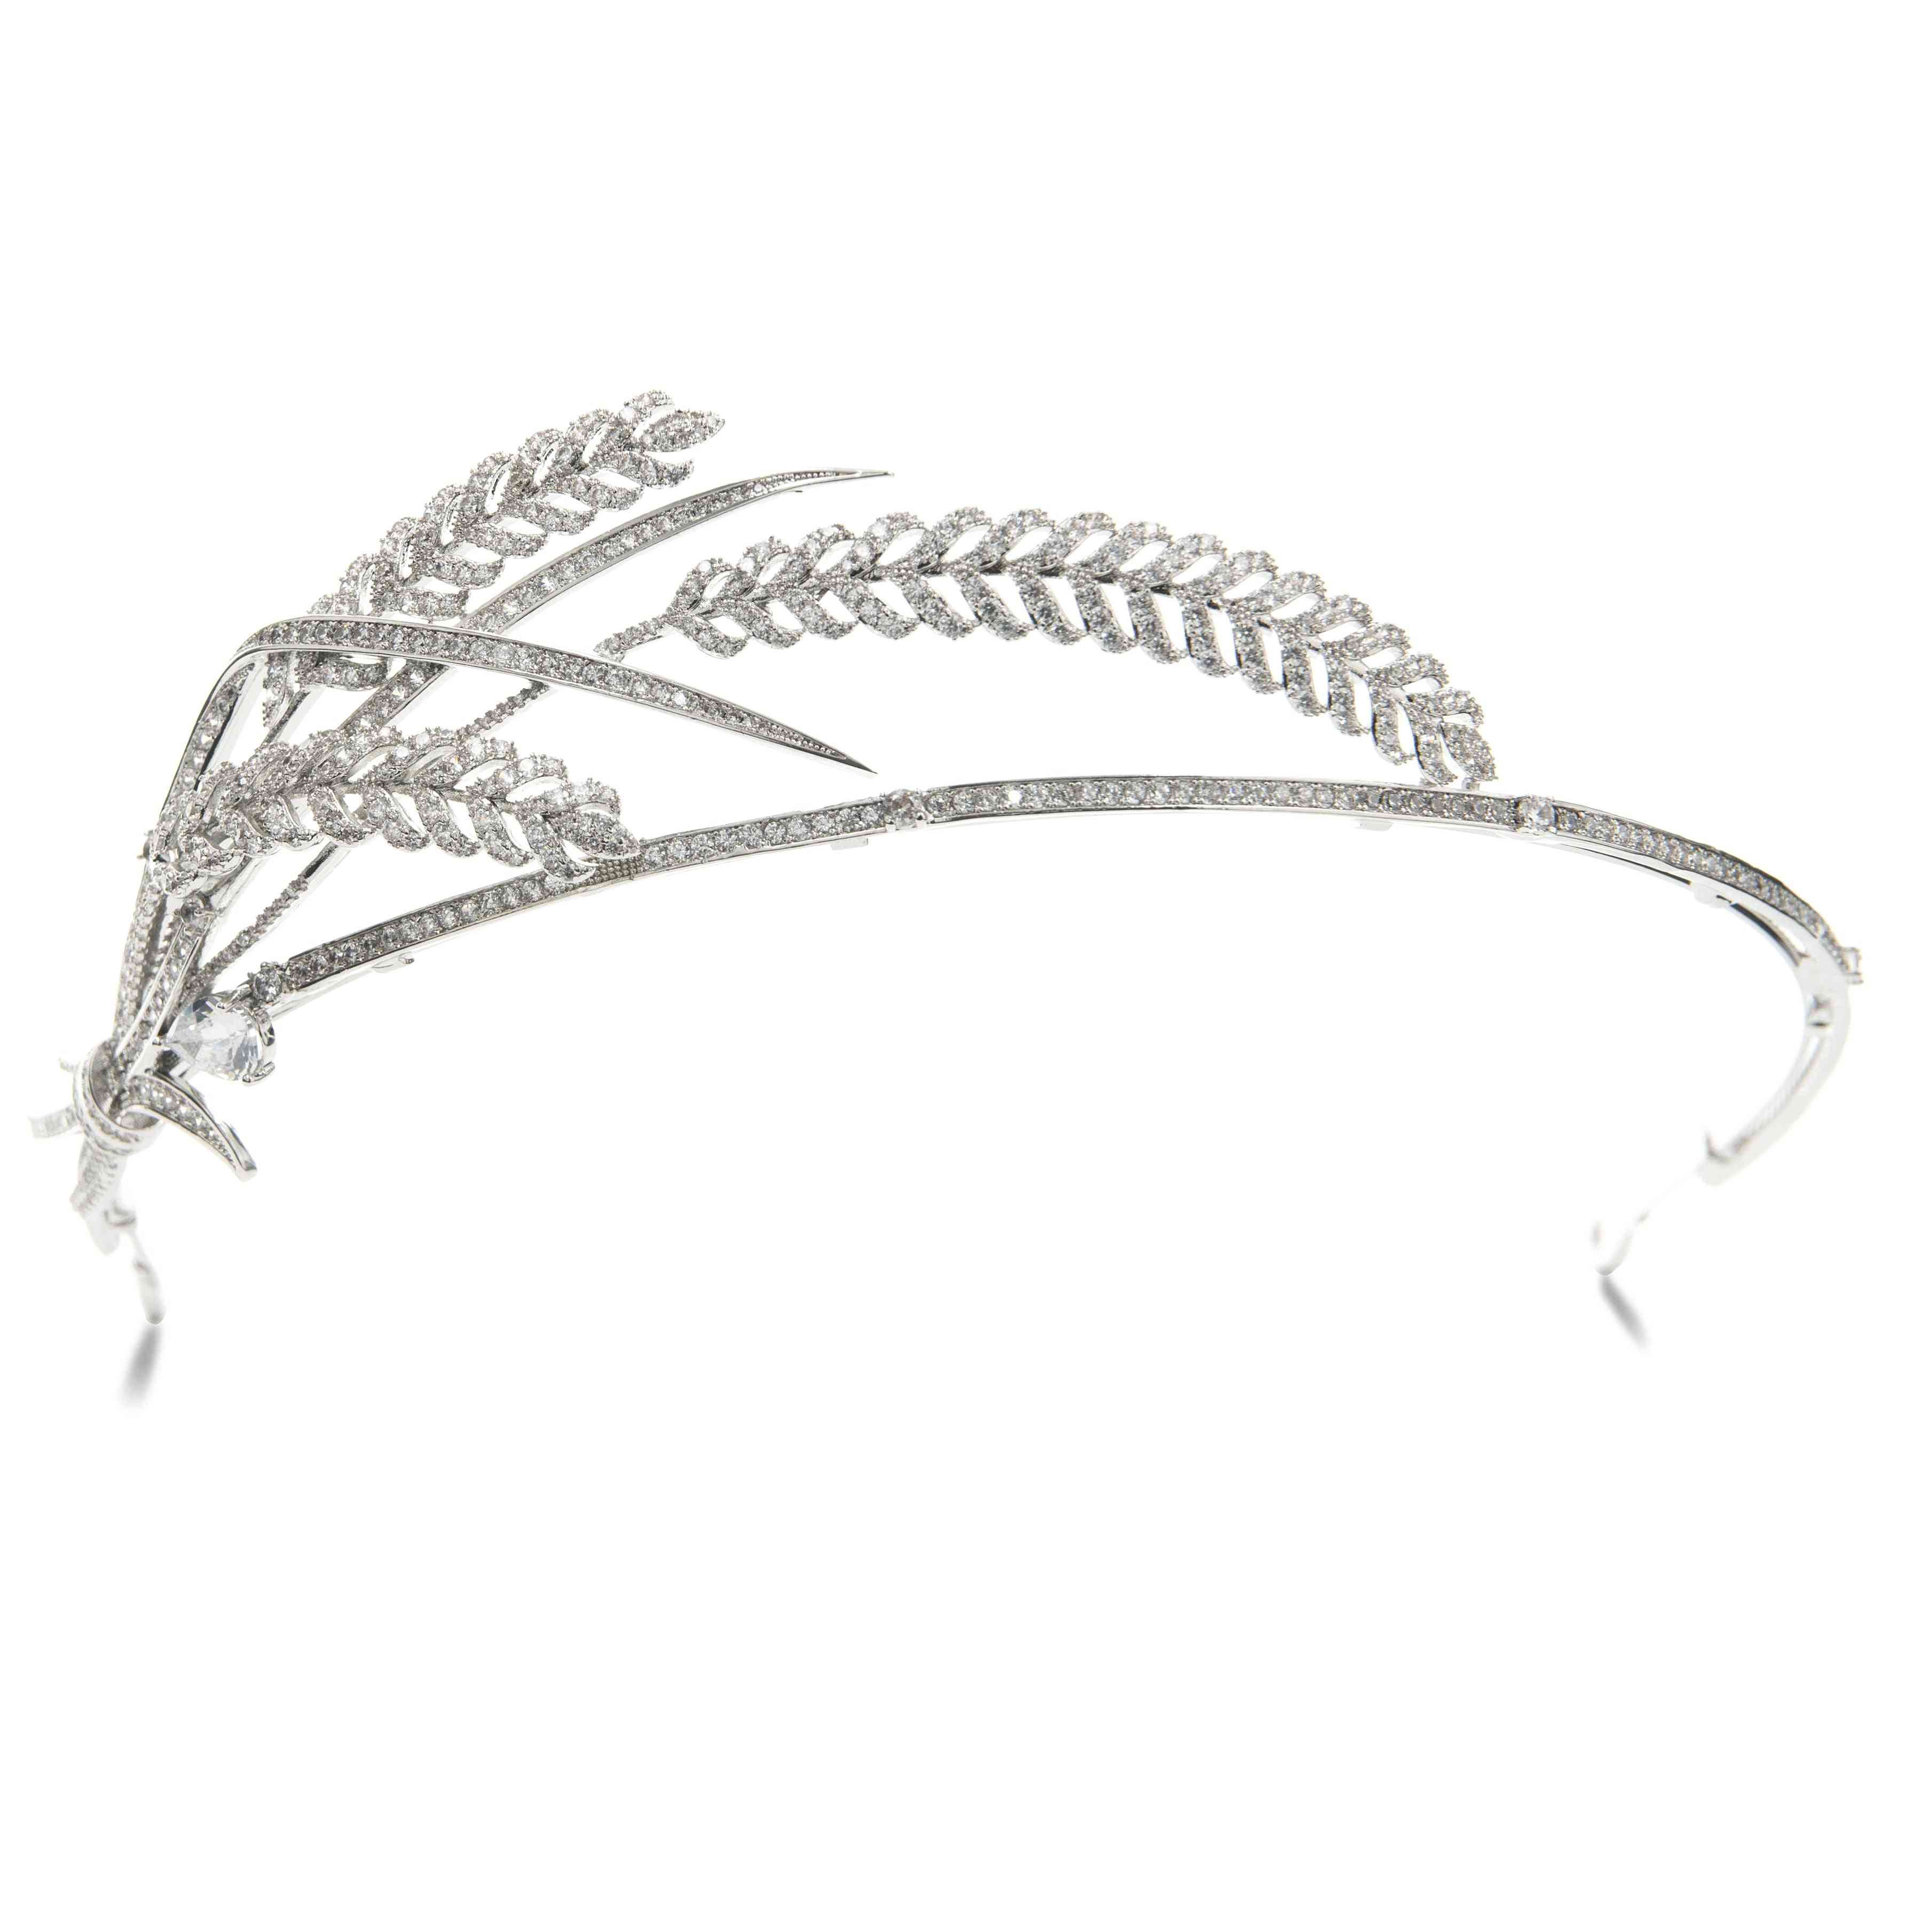 Classic  Wheat Girl Crystal Princess Crown For Bride Wedding Hair Jewelry